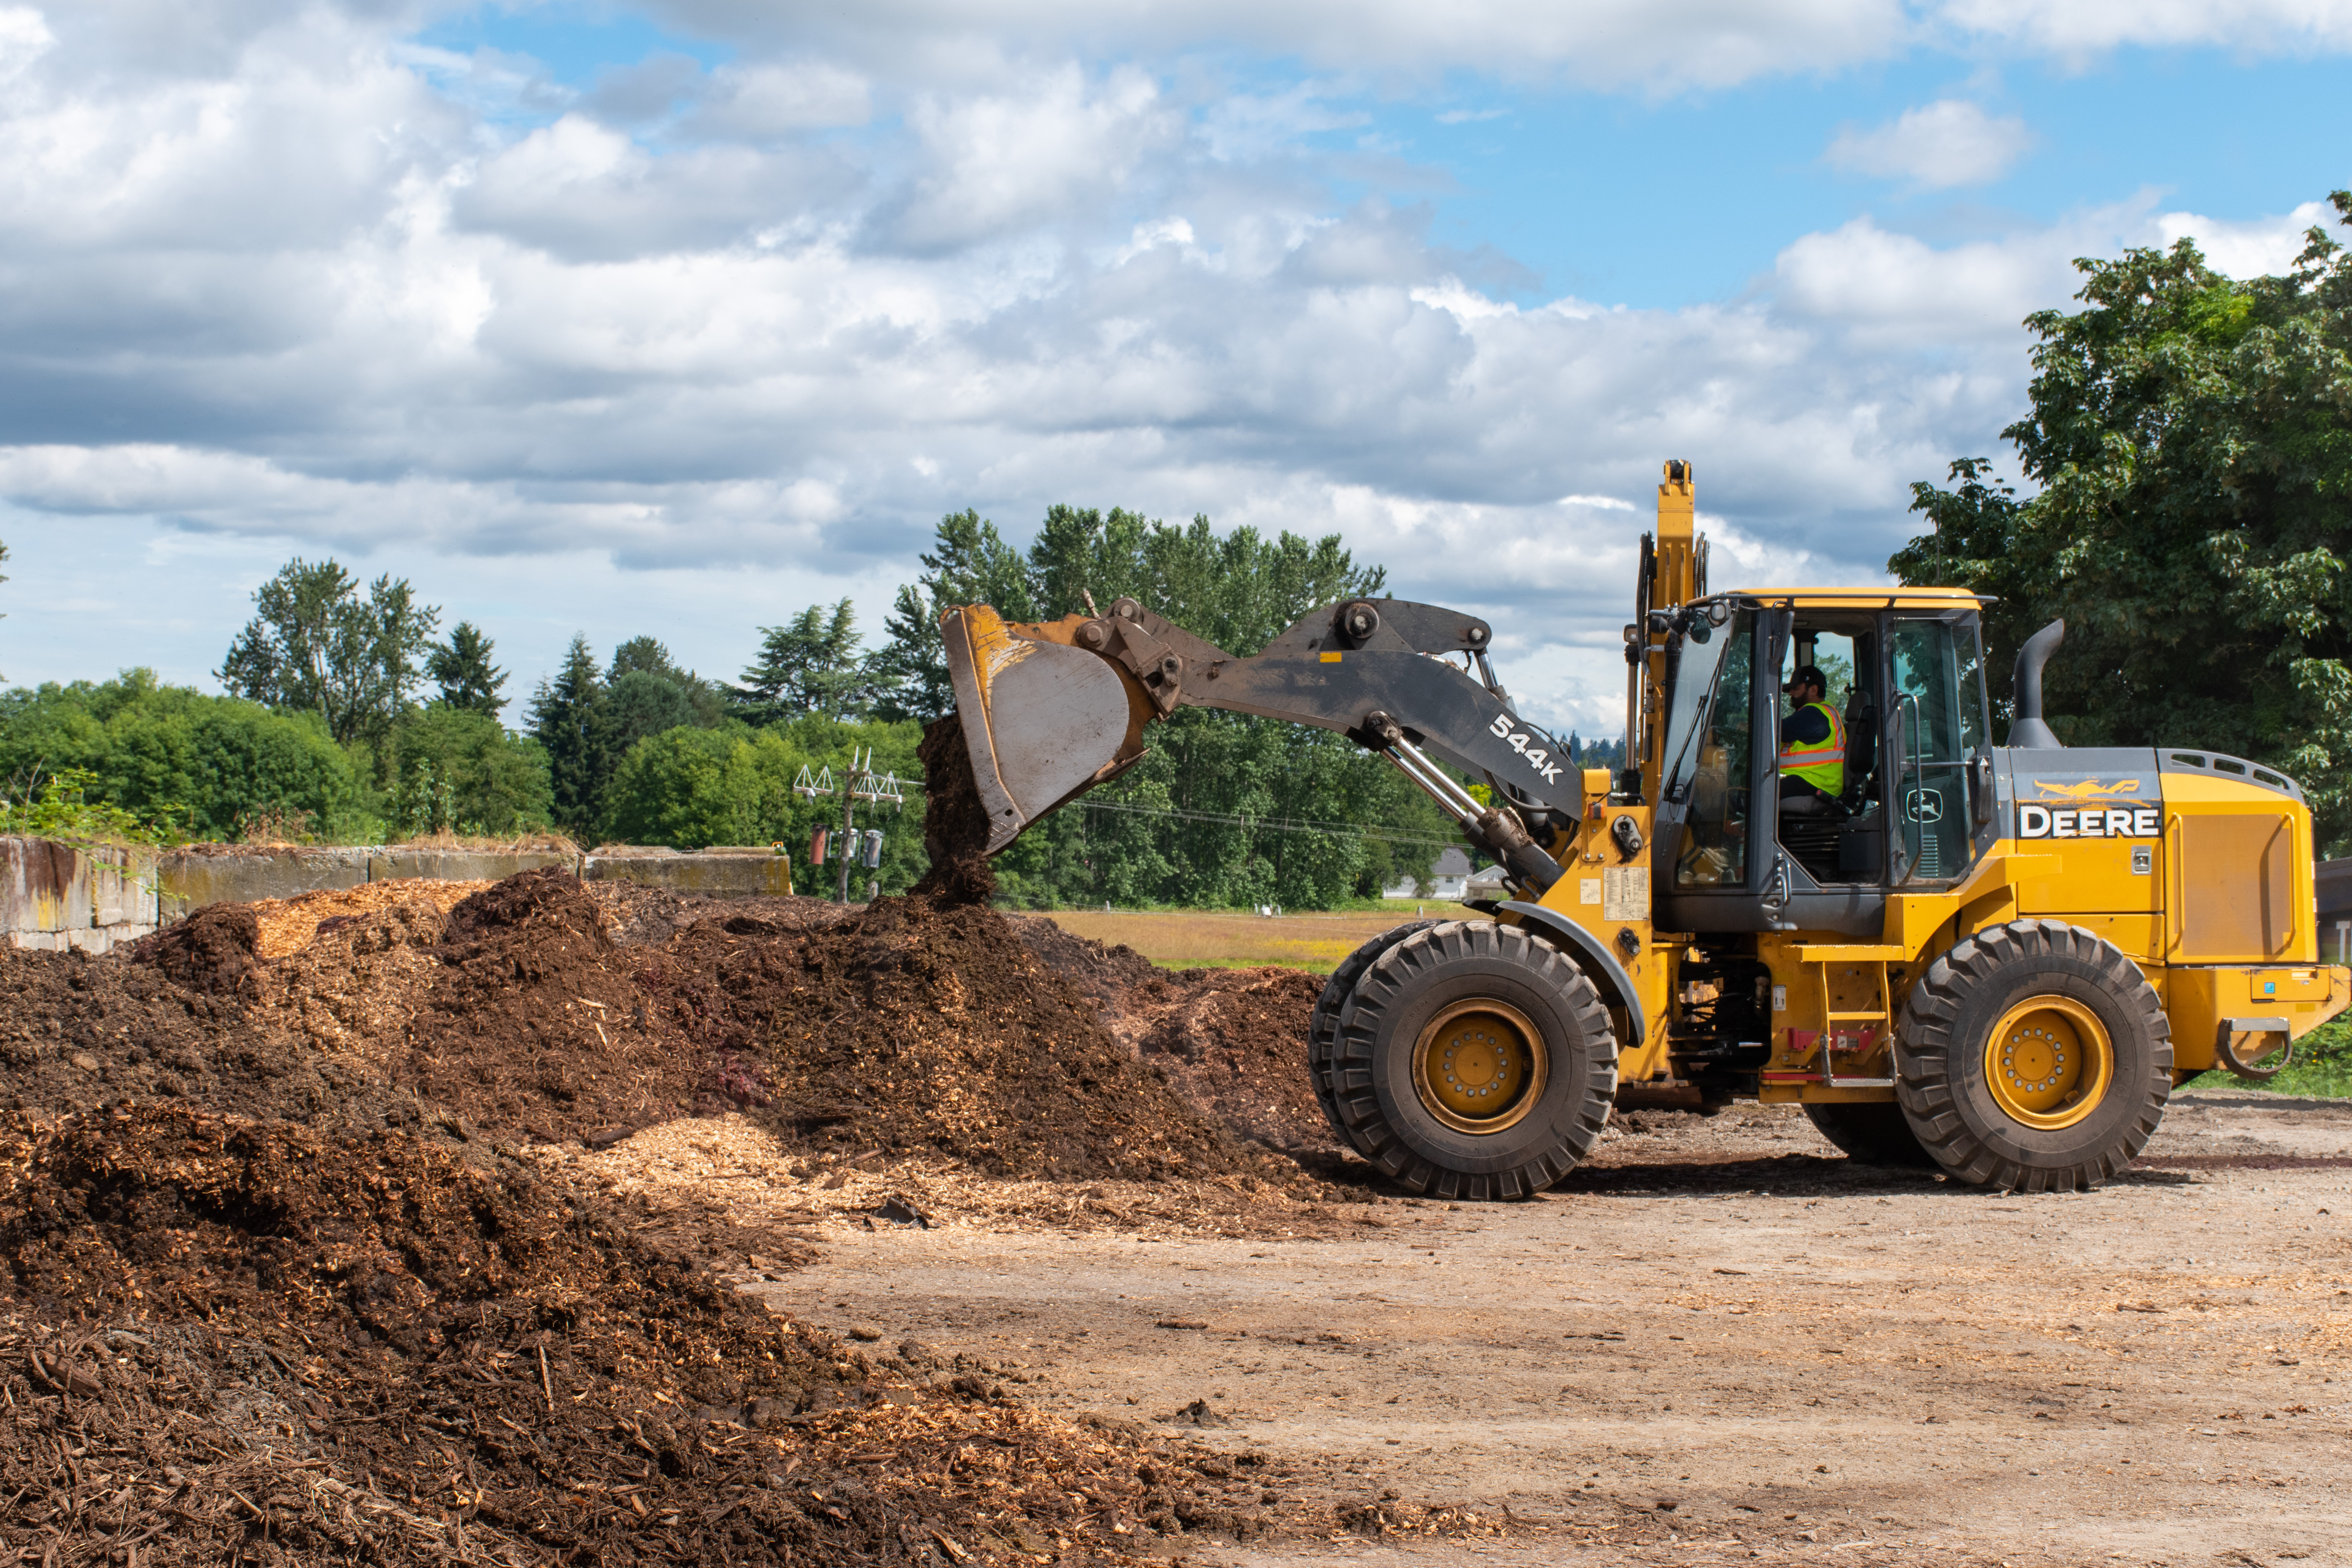 A large, yellow tractor digs into a large, brown pile of compost. Green foliage trees stand in the background beneath a blue sky with white, fluffy clouds.